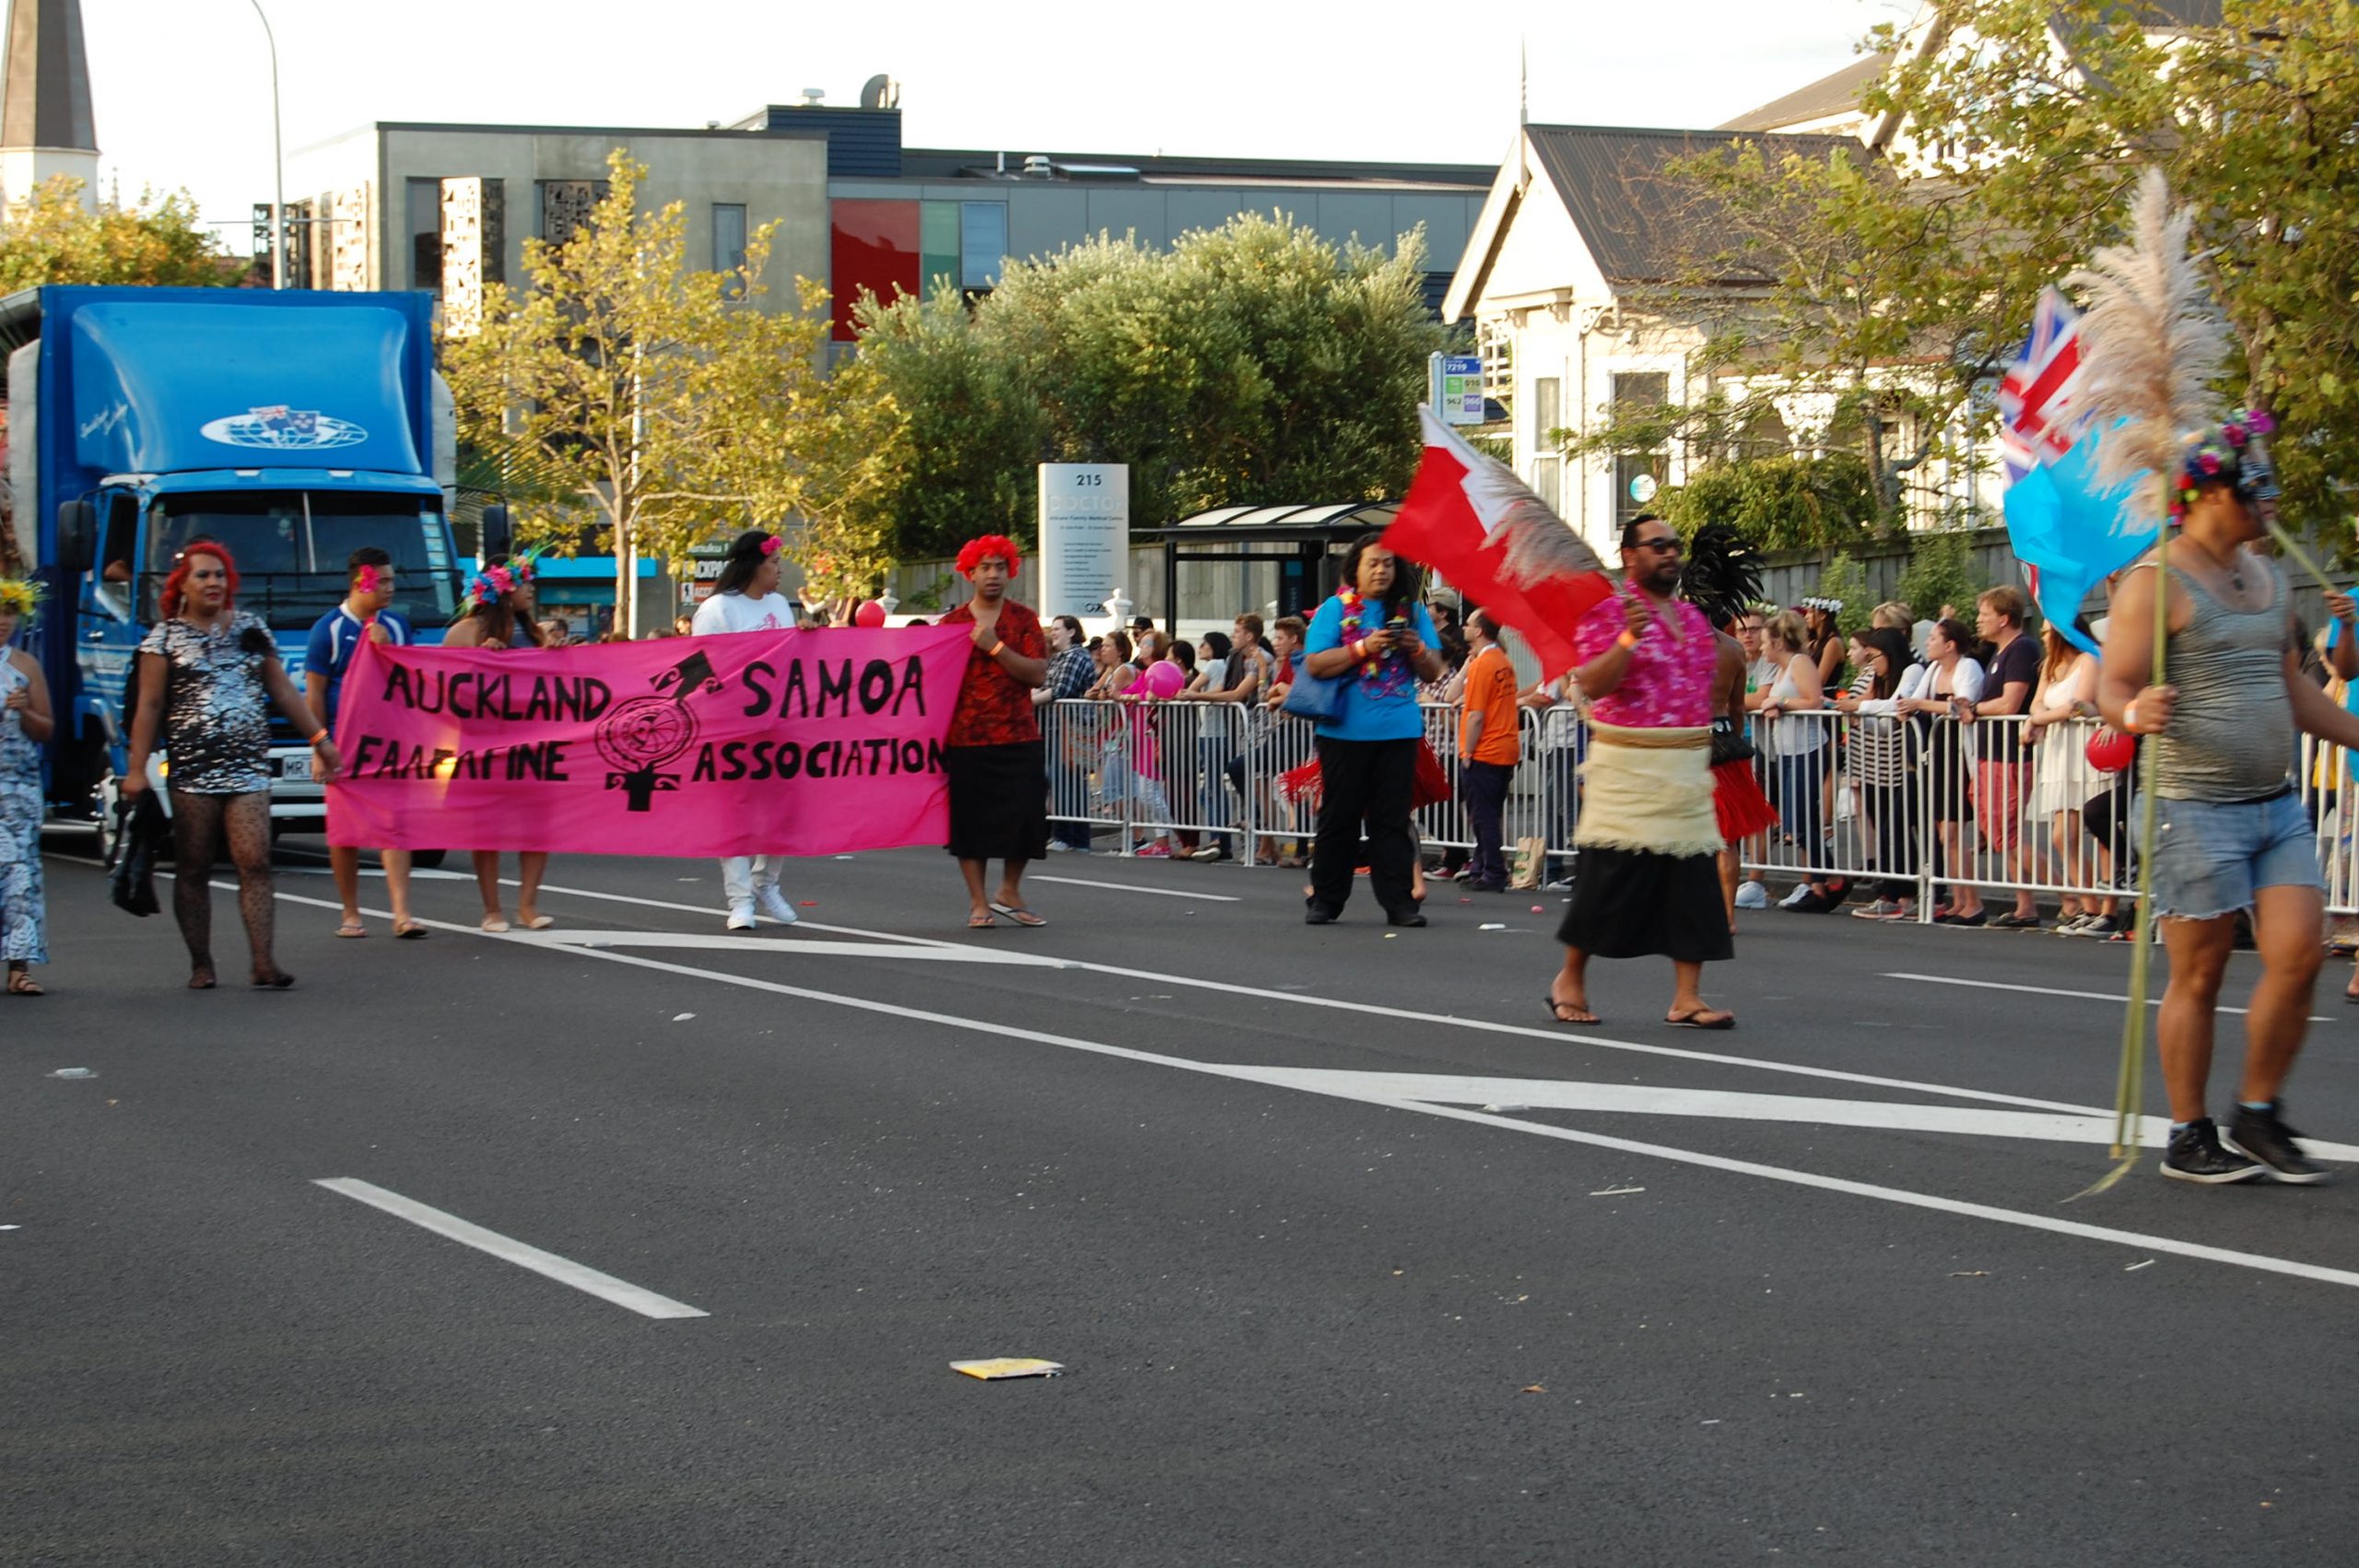 A parade, line of people hold a sign that says "Auckland Samoa Fa'afafine Association."